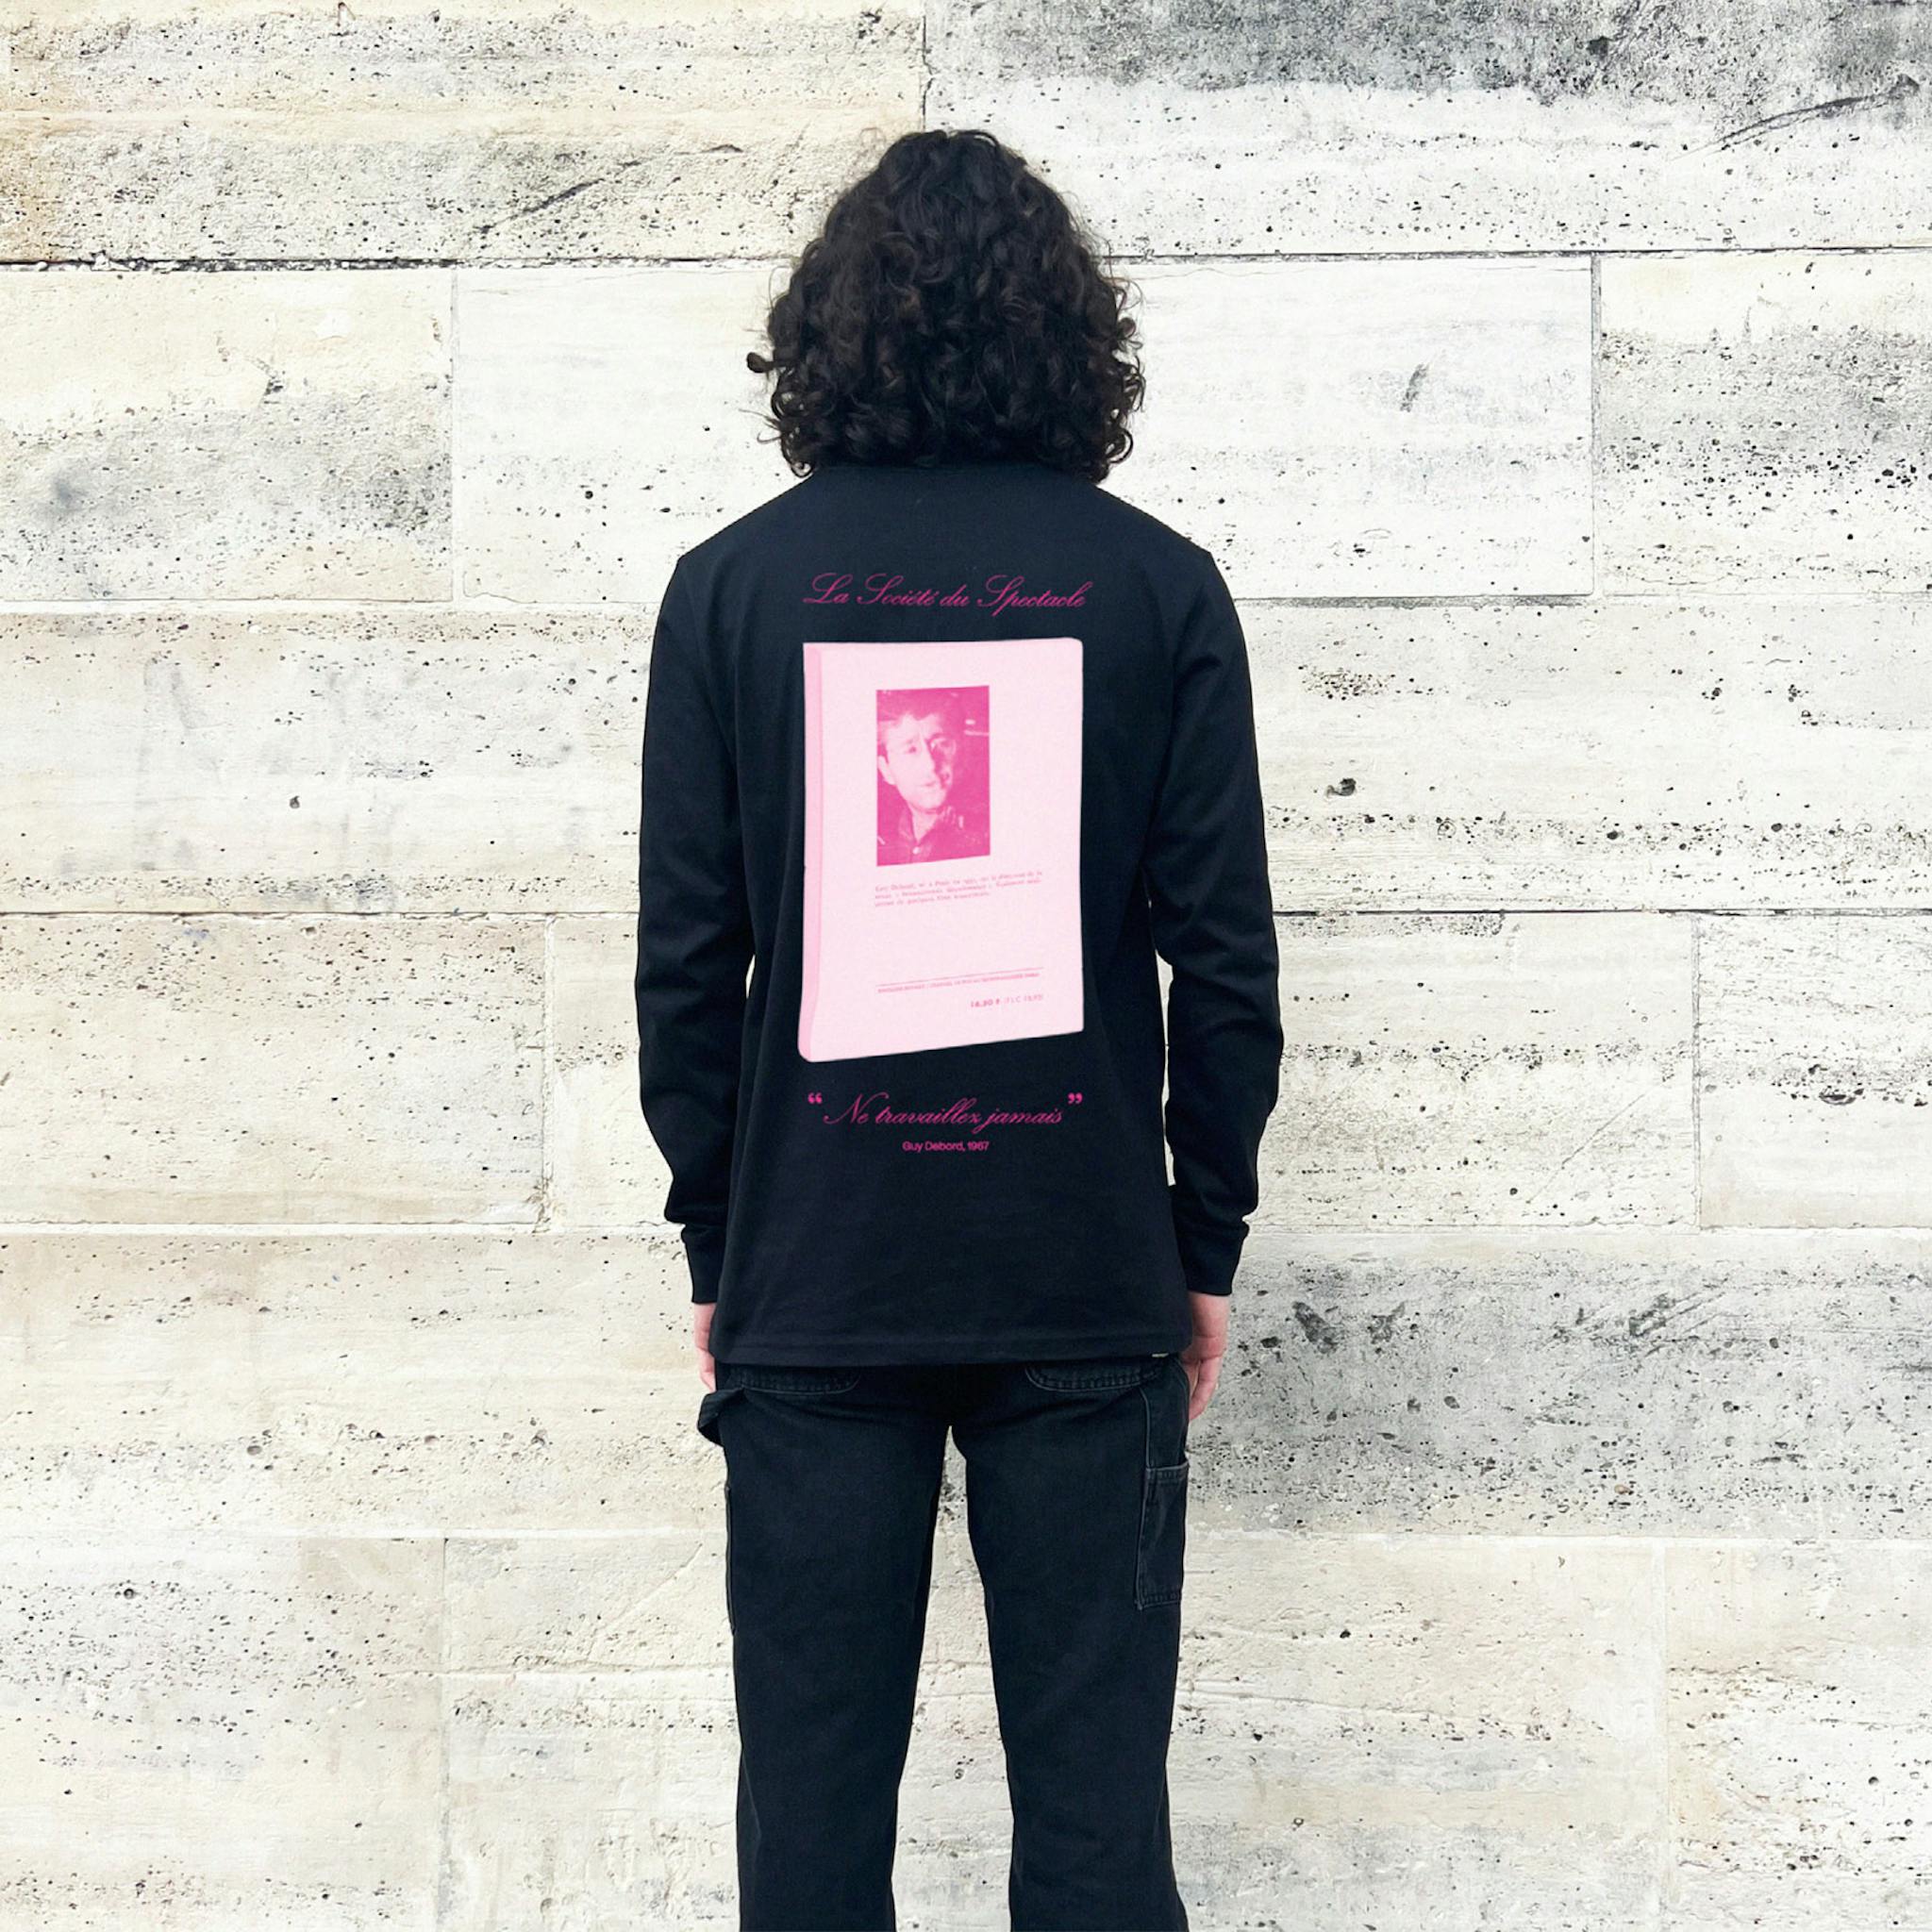 A man with long dark hair wearing a black long-sleeve T-shirt with large pink book graphic on the back and french words over and underneath.